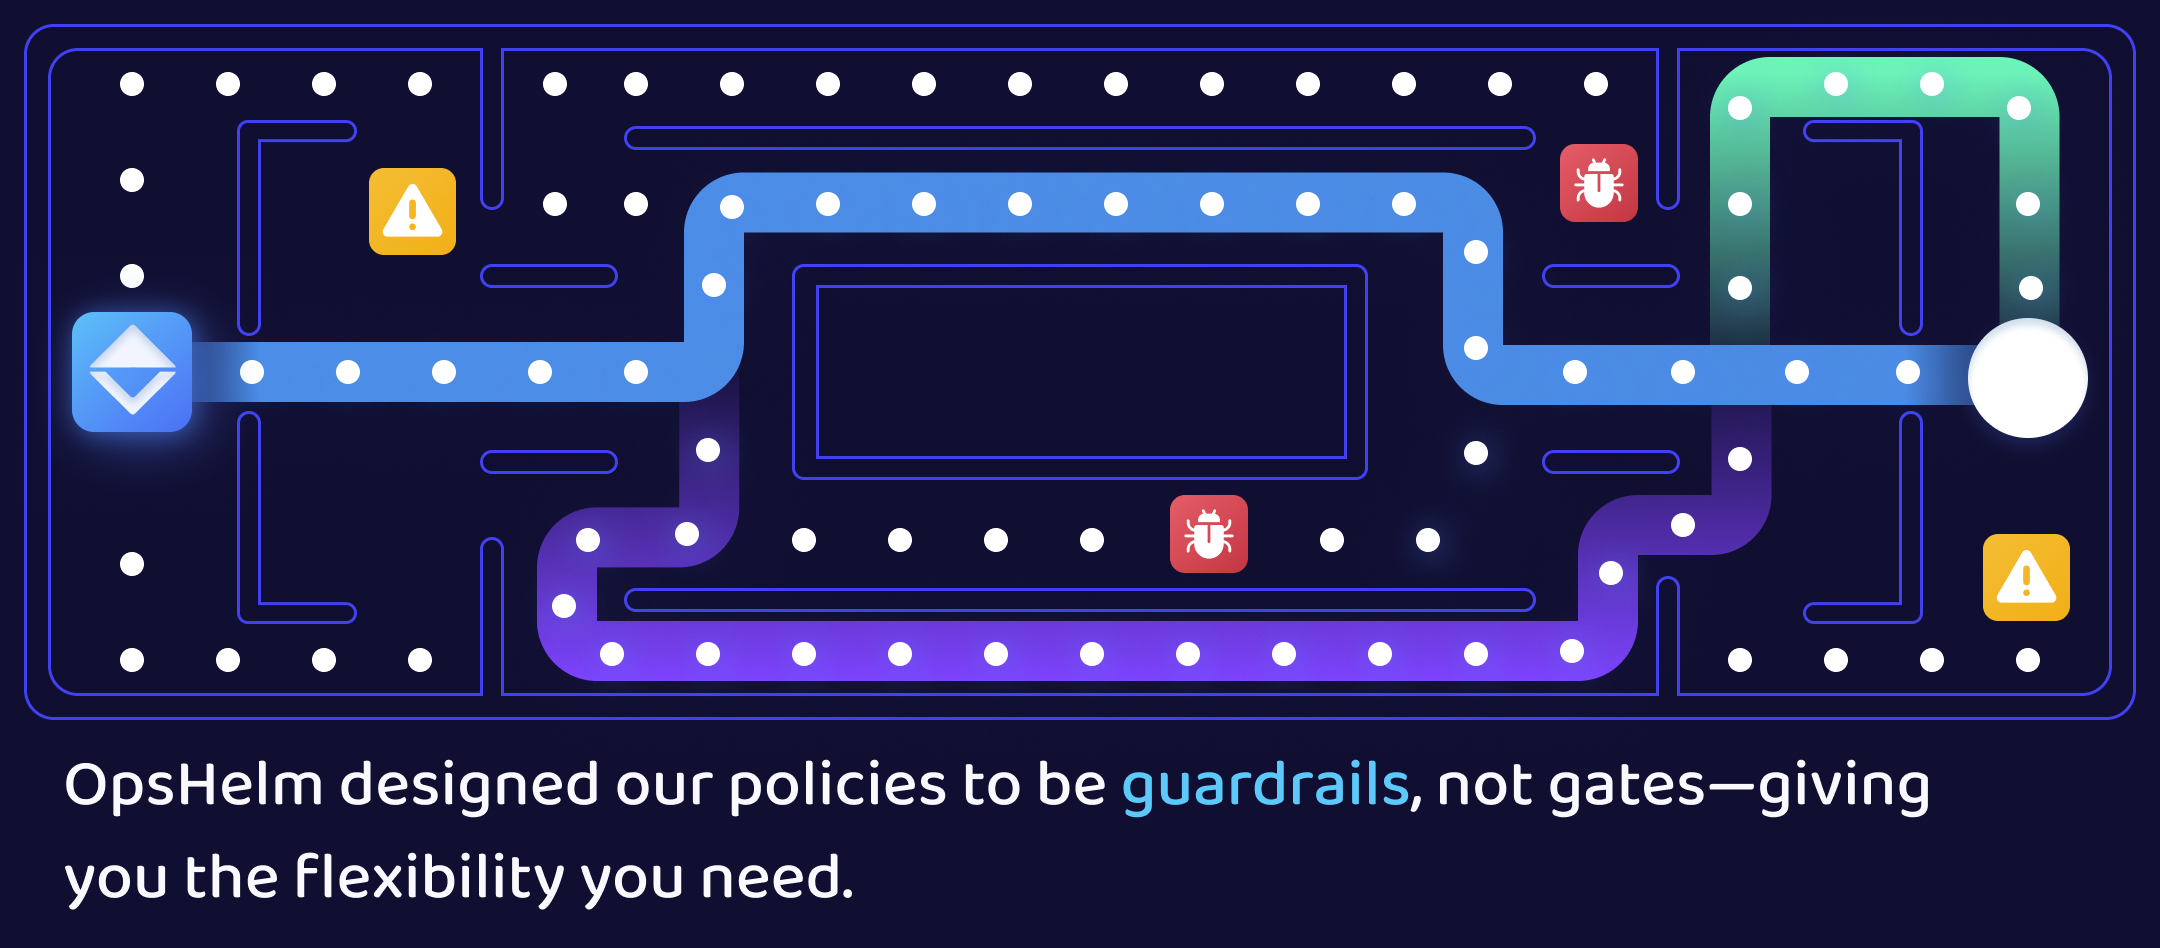 Illustration guardrails and not gates